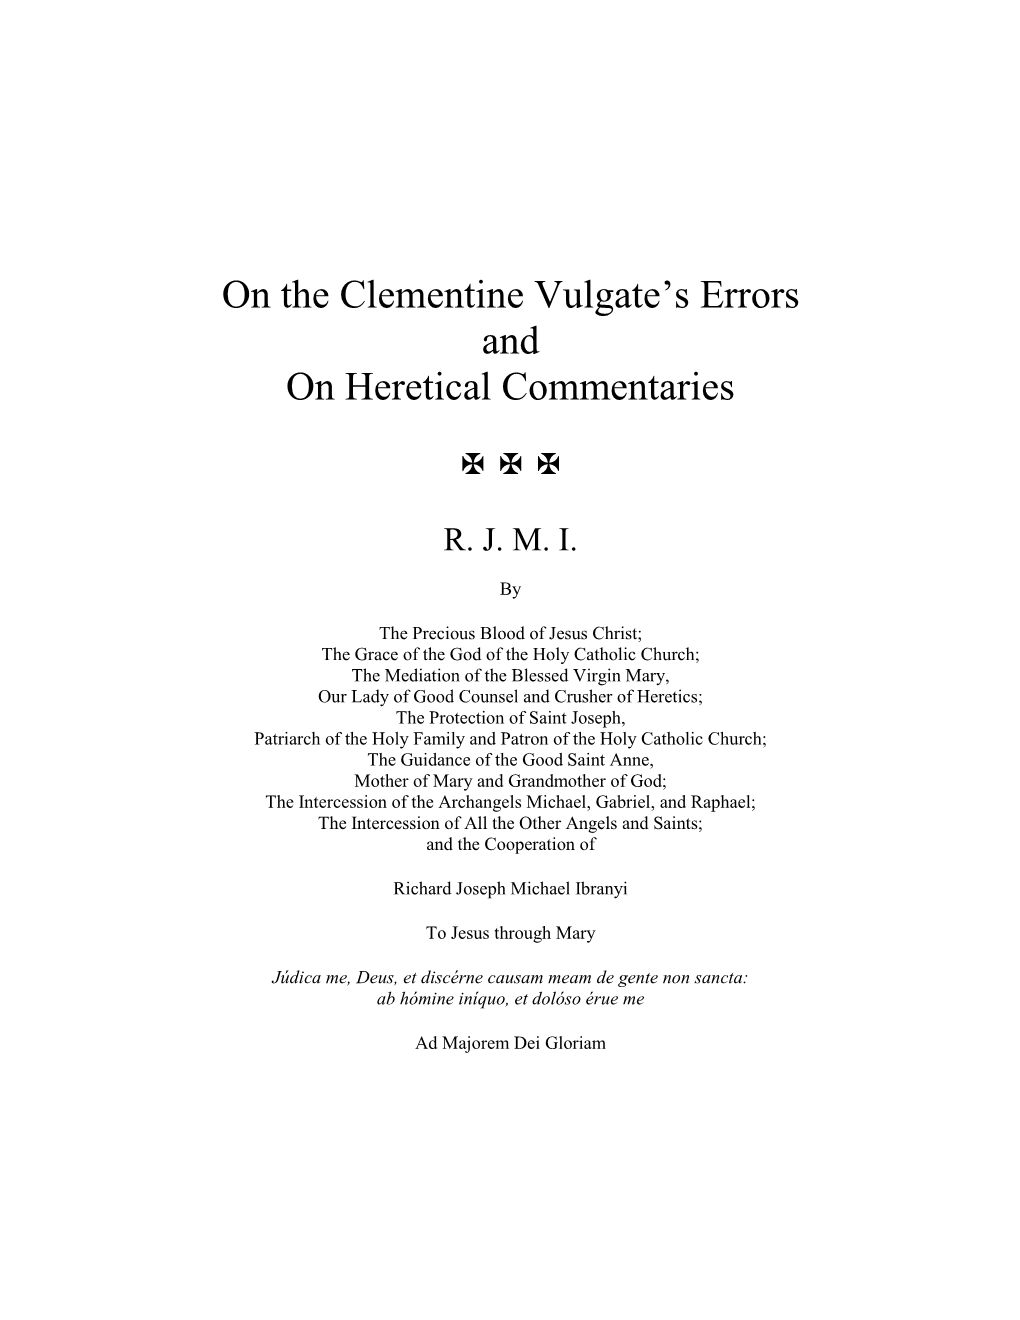 On the Clementine Vulgate's Errors and on Heretical Commentaries